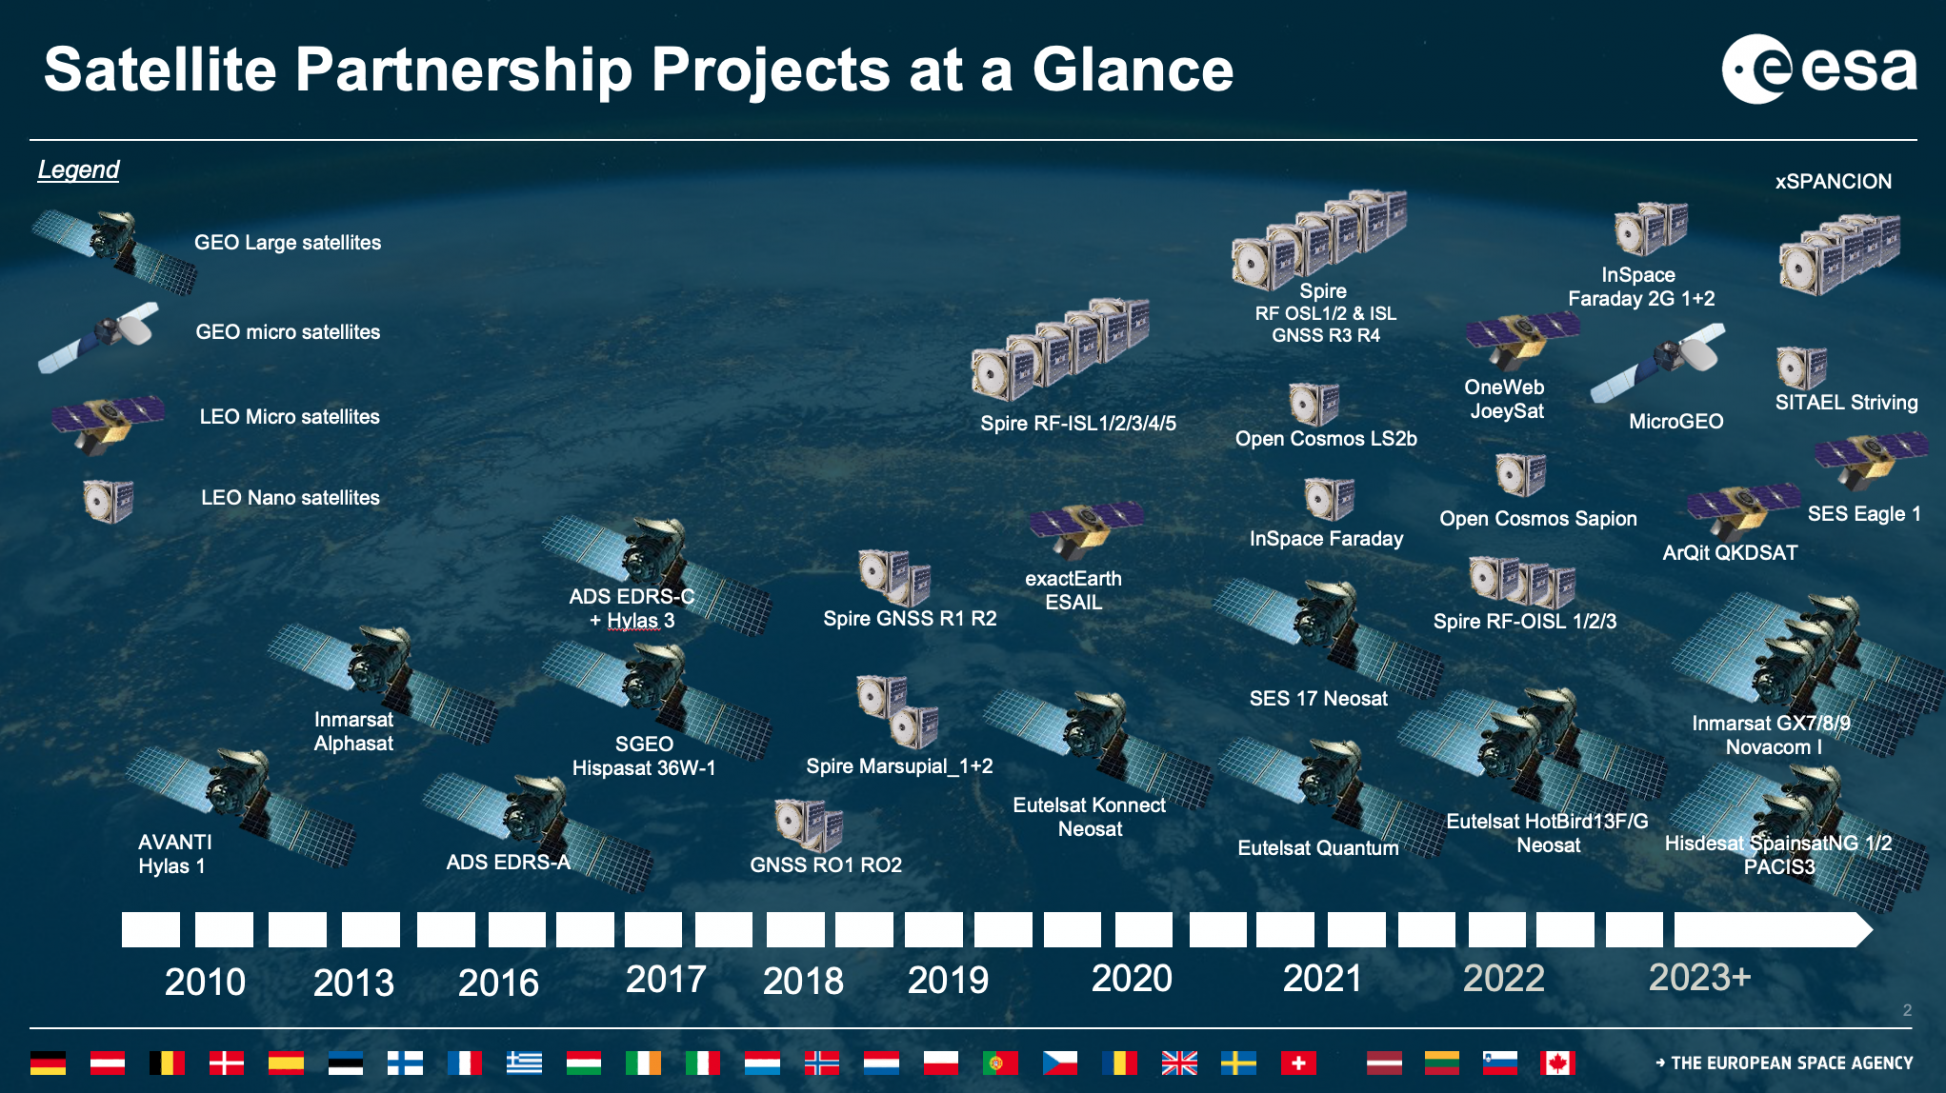 Satellite Partnership Projects at a Glance